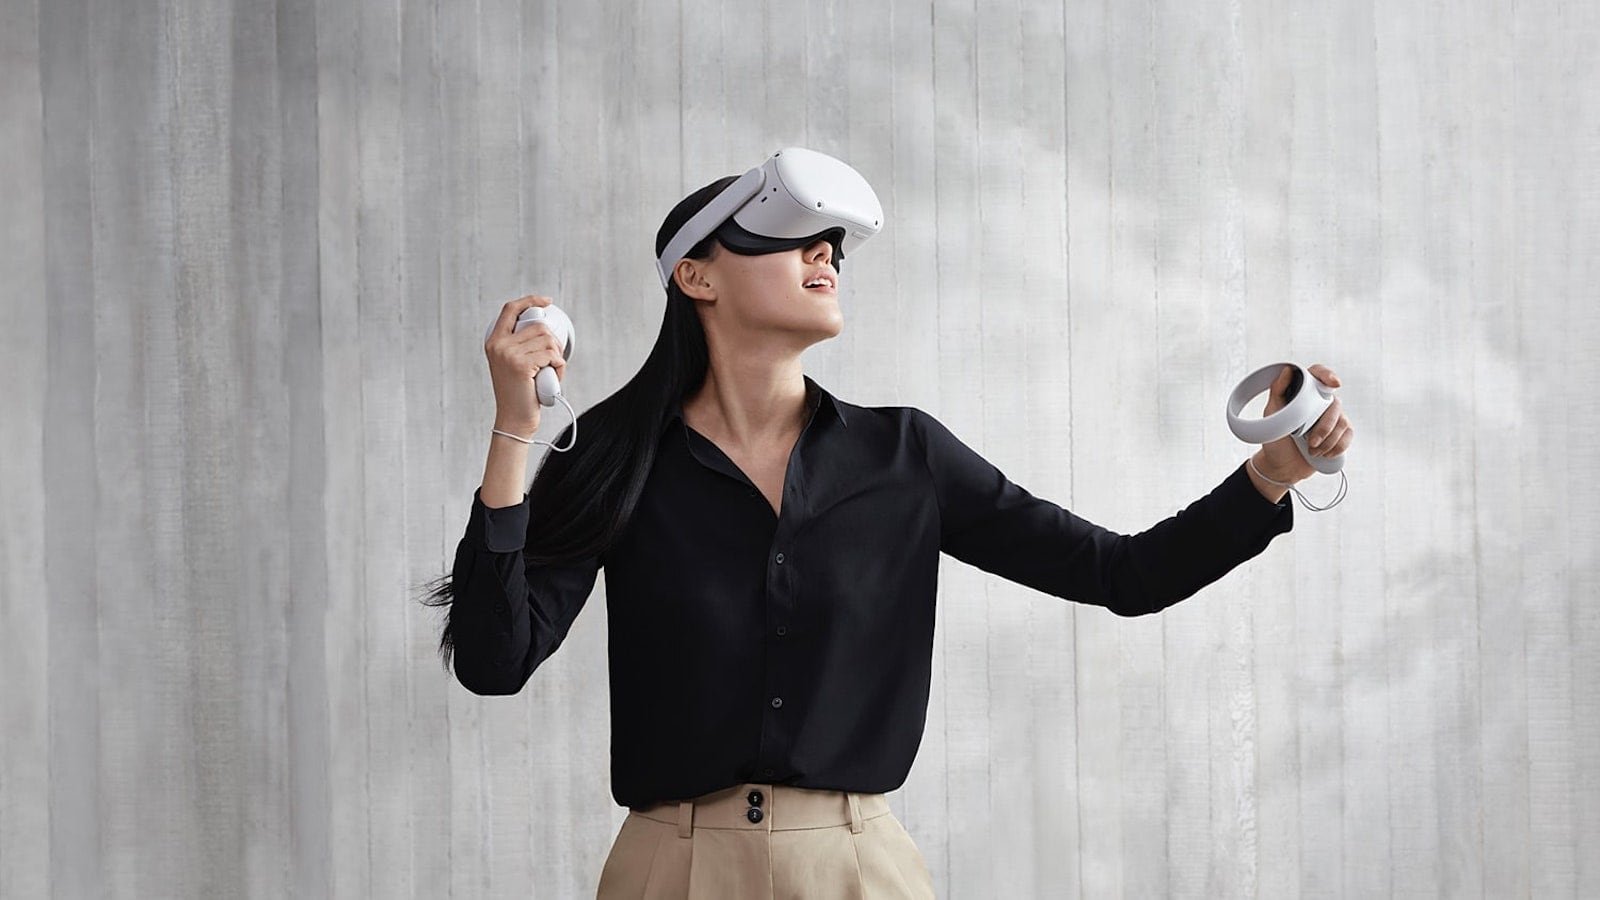 Oculus Quest 2 VR & AR headset has an incredibly reasonable price